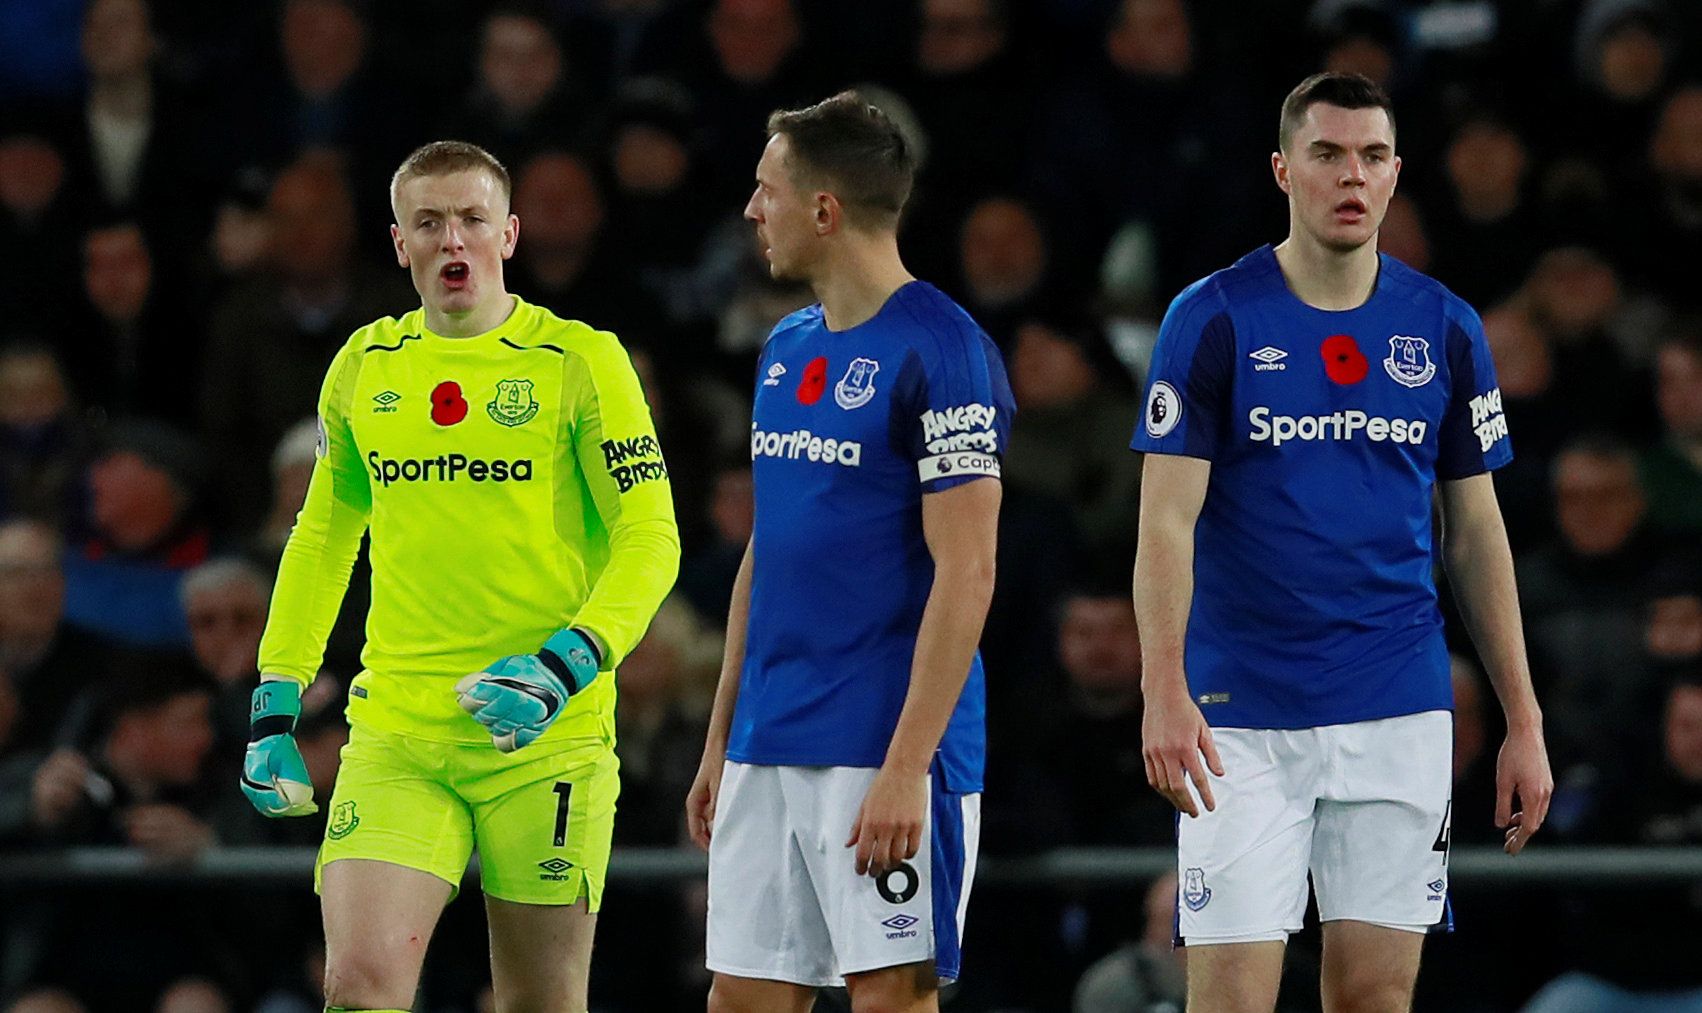 Soccer Football - Premier League - Everton vs Watford - Goodison Park, Liverpool, Britain - November 5, 2017   (L-R) Everton's Jordan Pickford, Phil Jagielka and Michael Keane look dejected after conceding a goal                          Action Images via Reuters/Jason Cairnduff  EDITORIAL USE ONLY. No use with unauthorized audio, video, data, fixture lists, club/league logos or 